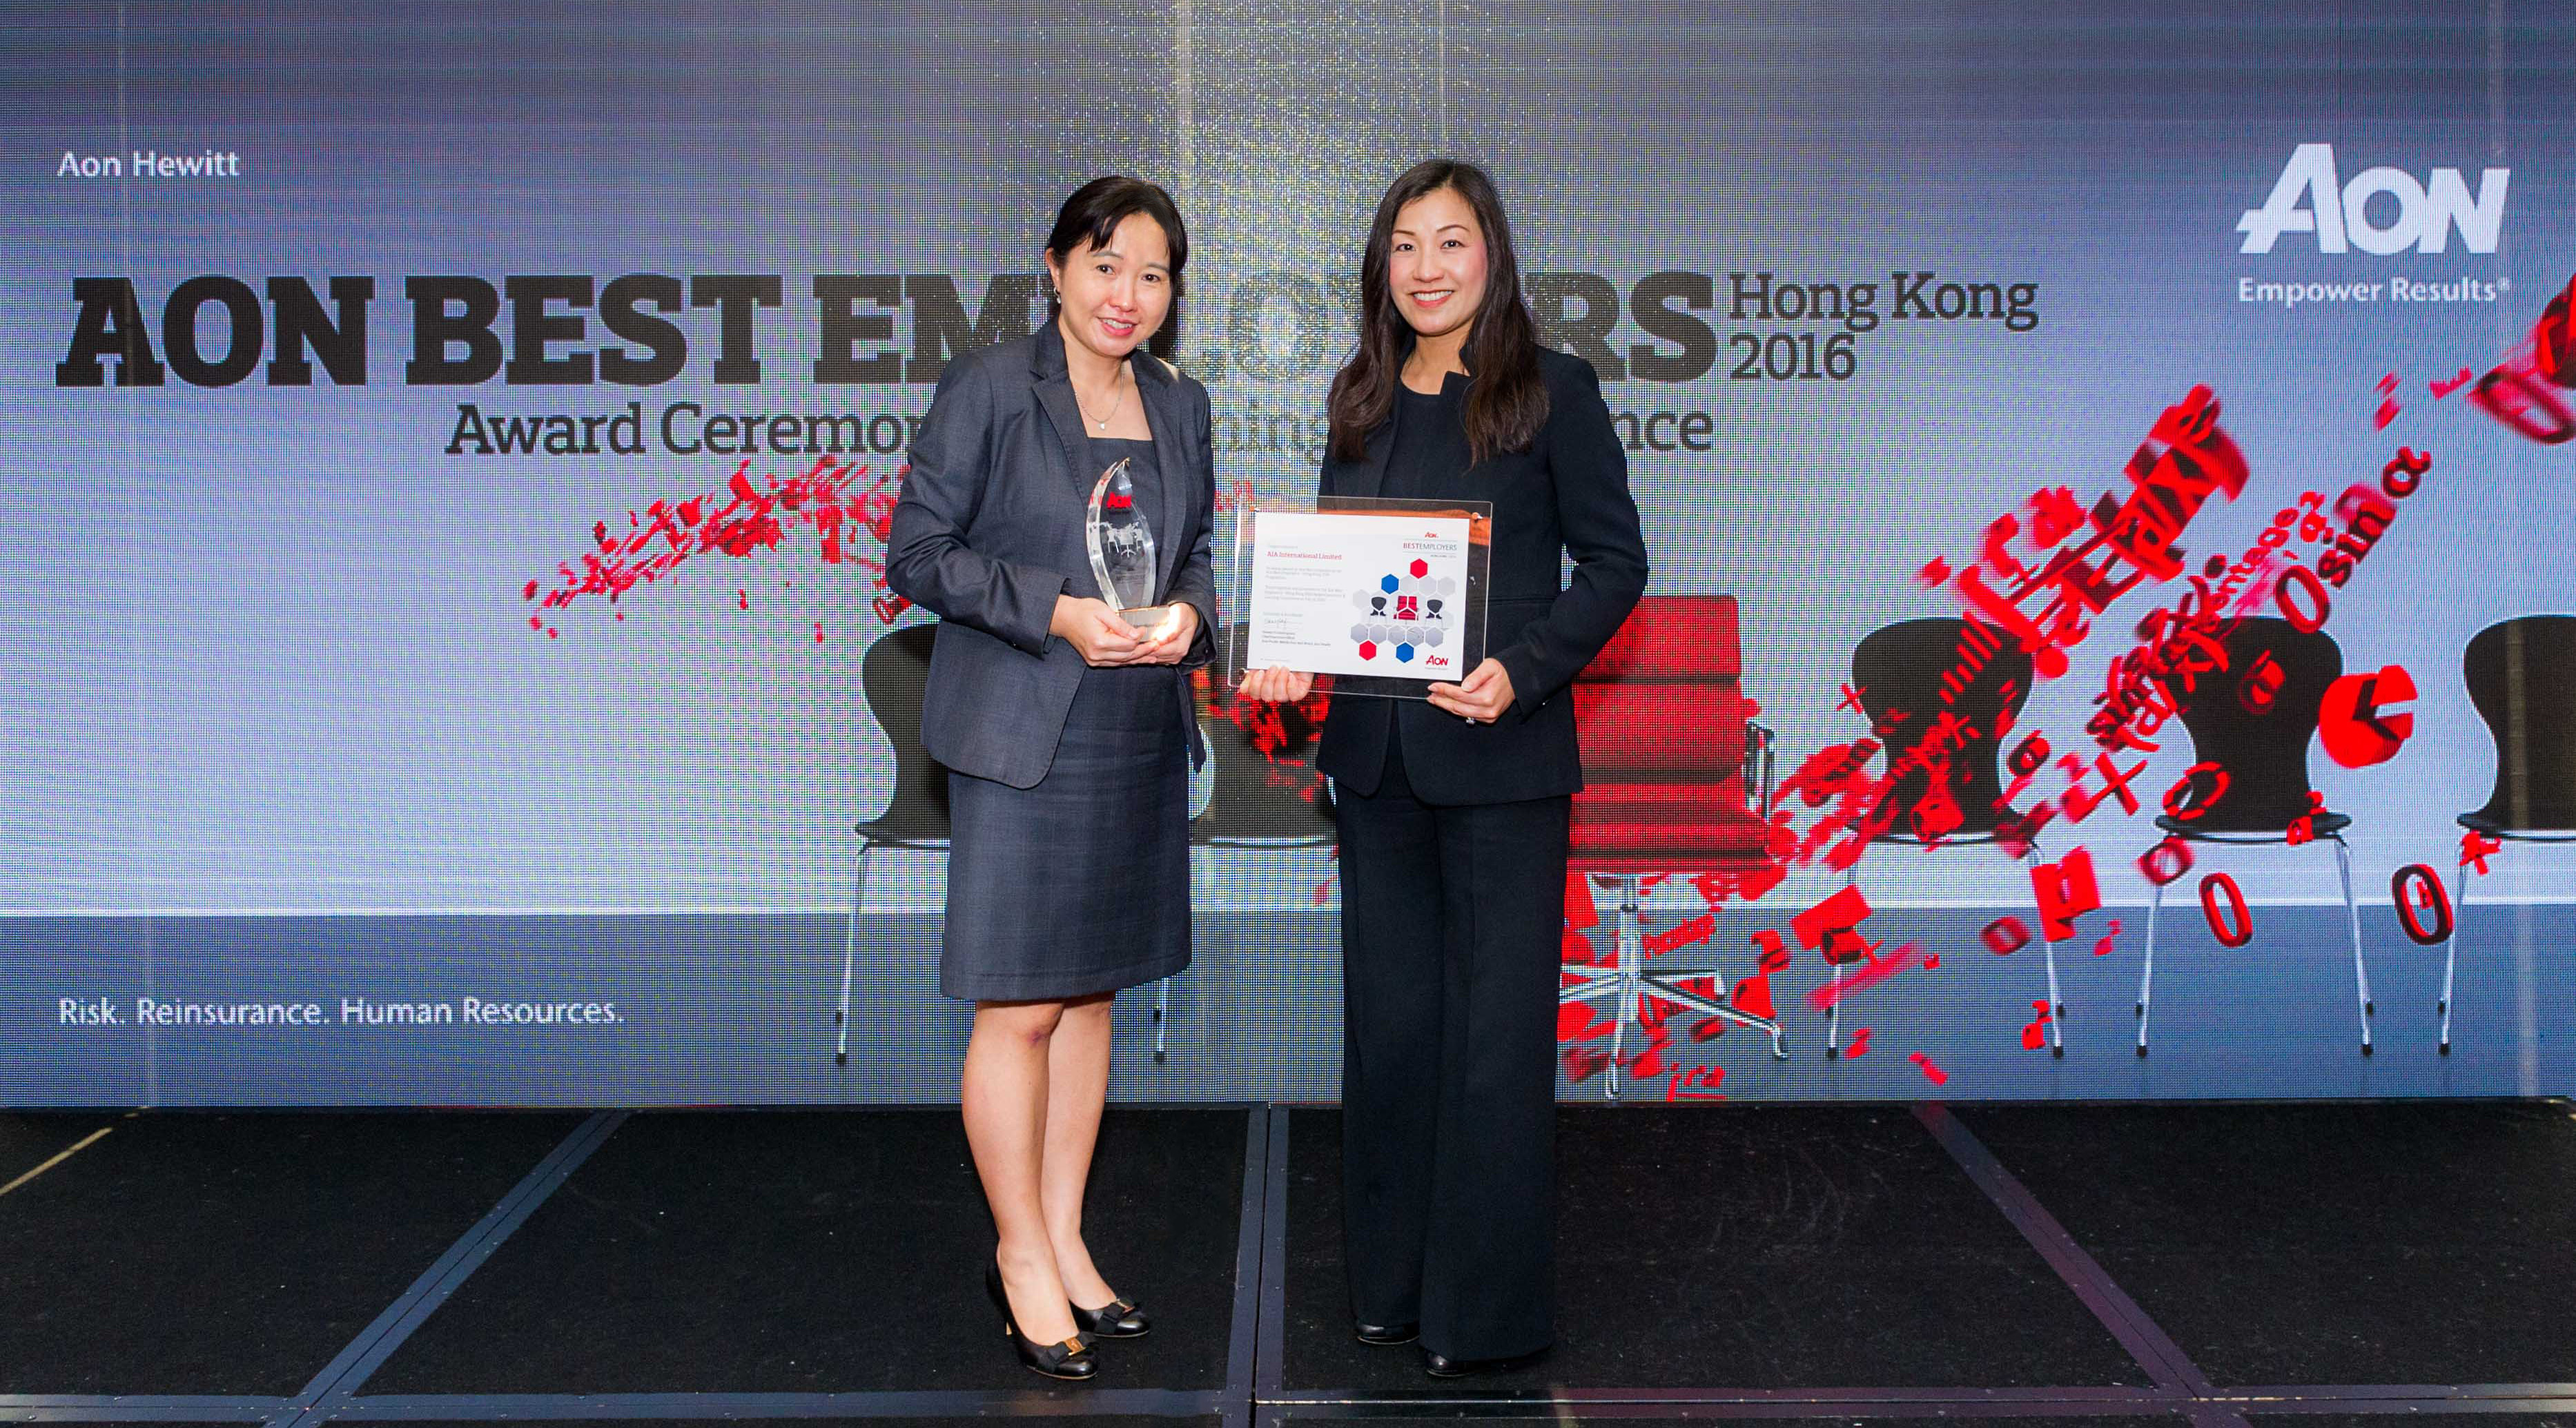 Ms Wei Wei Watson, Chief Human Resources Officer of AIA Hong Kong and Macau (left) and Ms Bonnie Tse, General Manager, Business Strategy and Marketing of AIA Hong Kong and Macau (right) receive the “Best Employer Hong Kong 2016” Award on behalf of the Company. AIA Hong Kong is the first insurer ever in Hong Kong to be honoured with this accolade, recognising the Company’s excellent achievement in talent management and development.